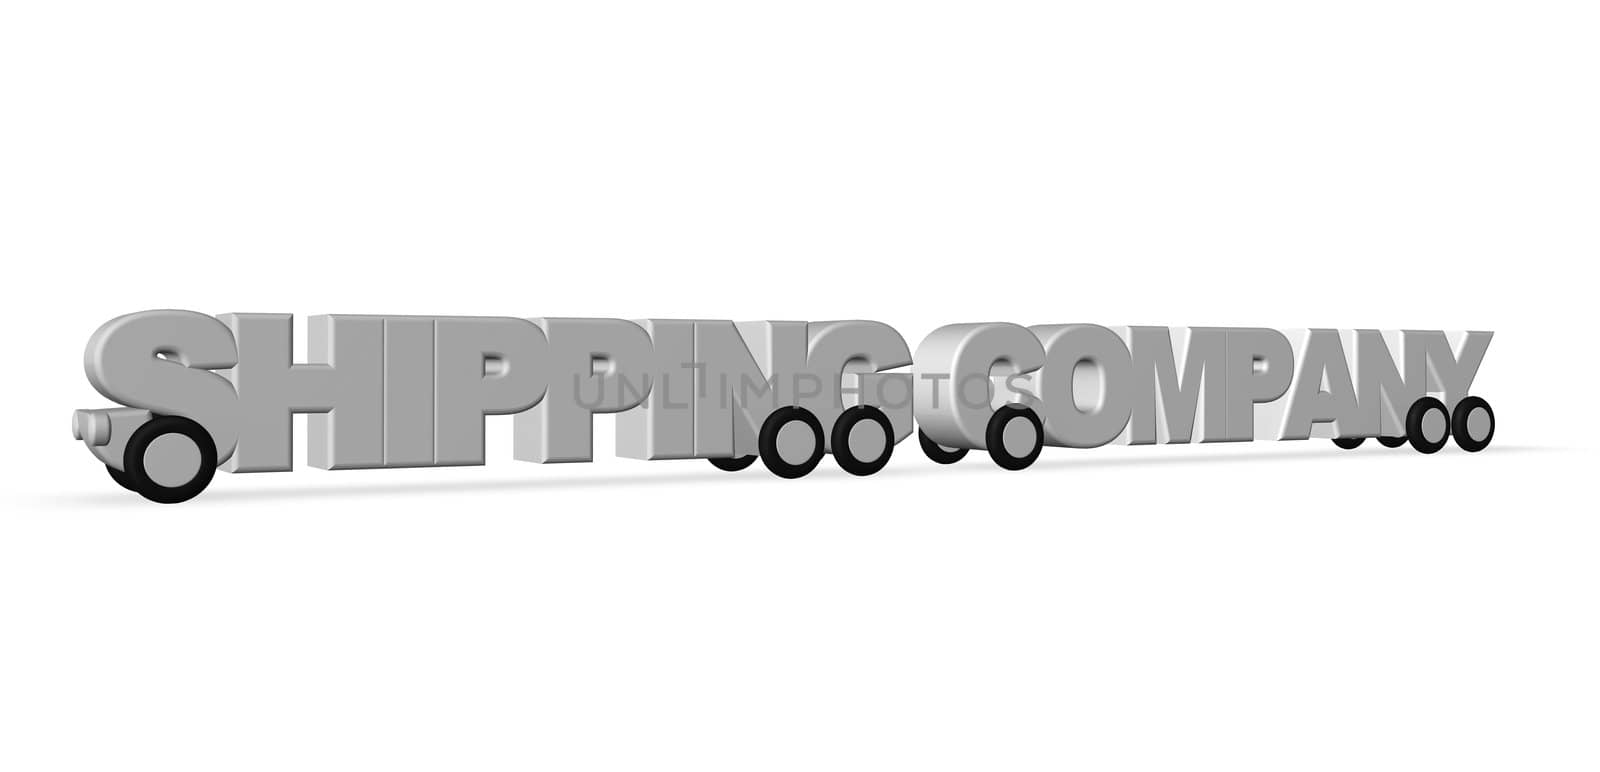 the words shipping company on wheels - 3d illustration